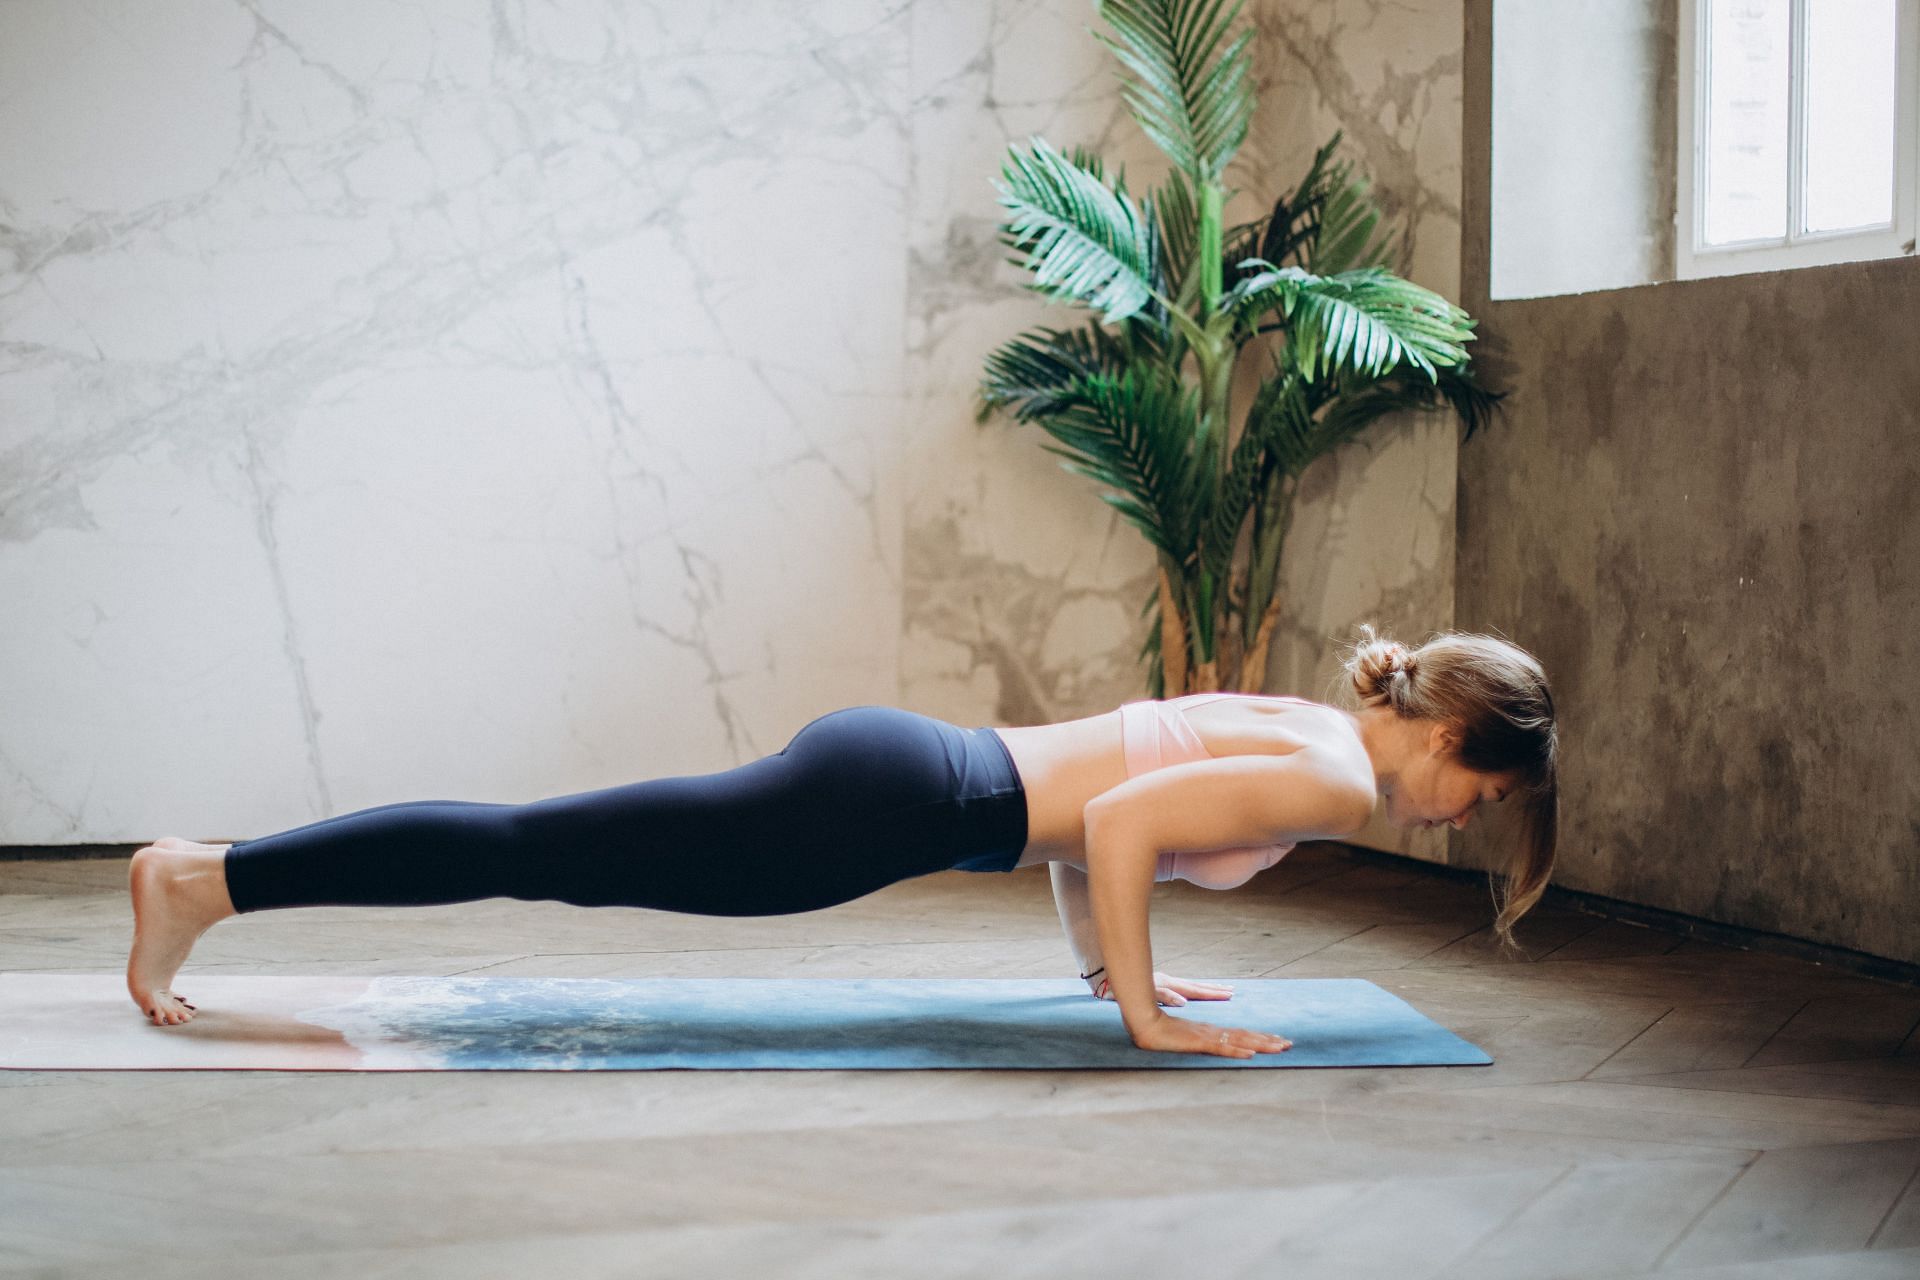 Plank pose helps in strengthening your core and chest muscles. (Image via Pexels / Elina Fairytale)